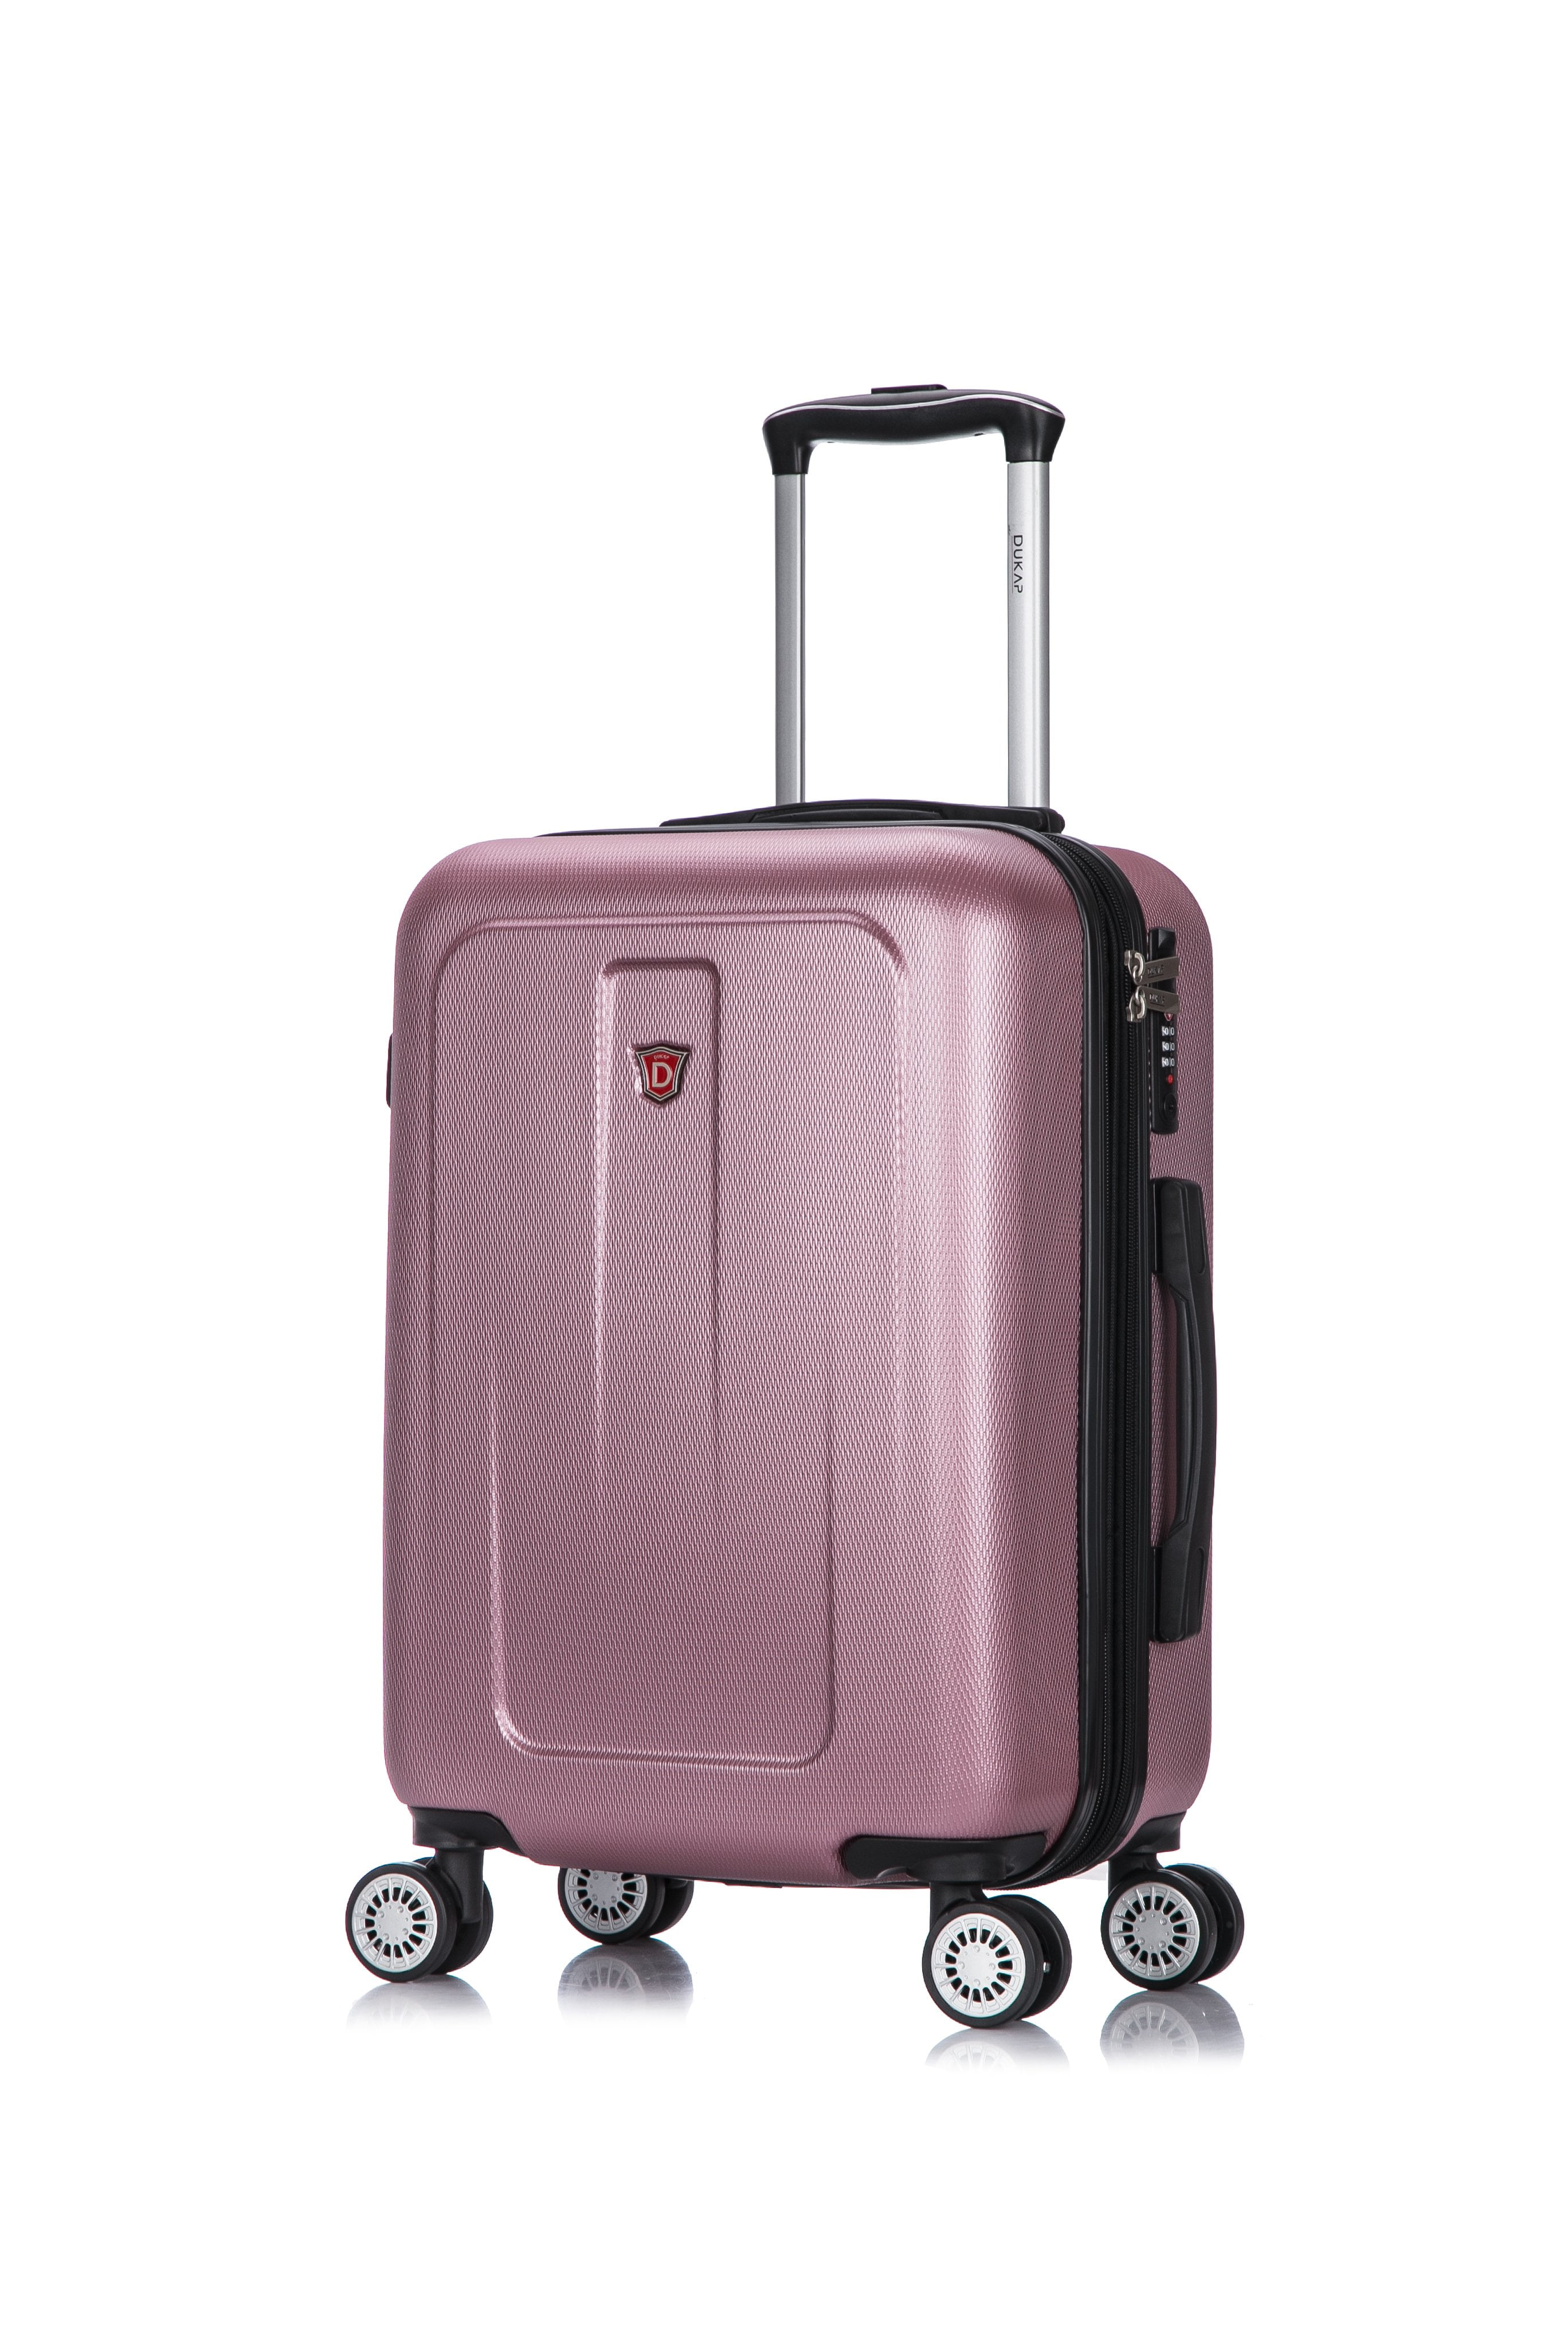 COOLIFE Luggage Suitcase Piece Set Carry On ABS+PC Spinner Trolley 